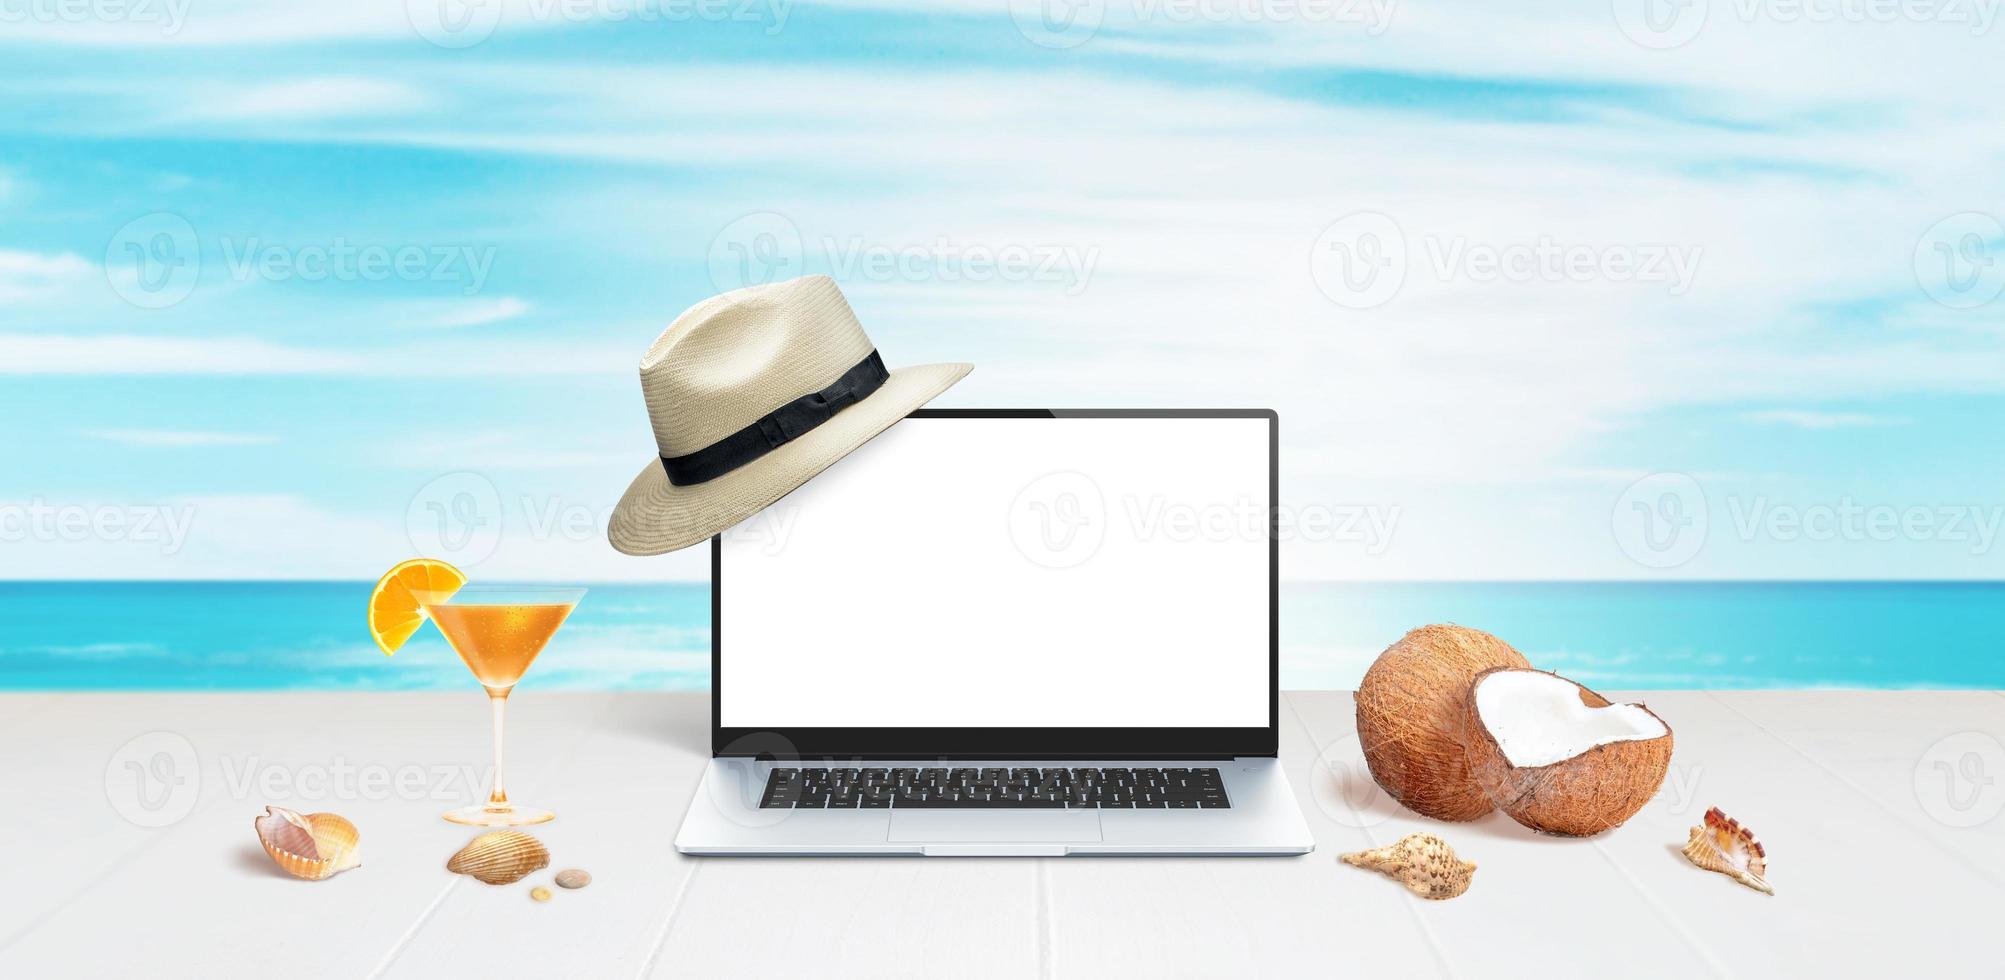 Laptop mockup with white hat on display on white surface with coconuts, shells and orange cocktail photo